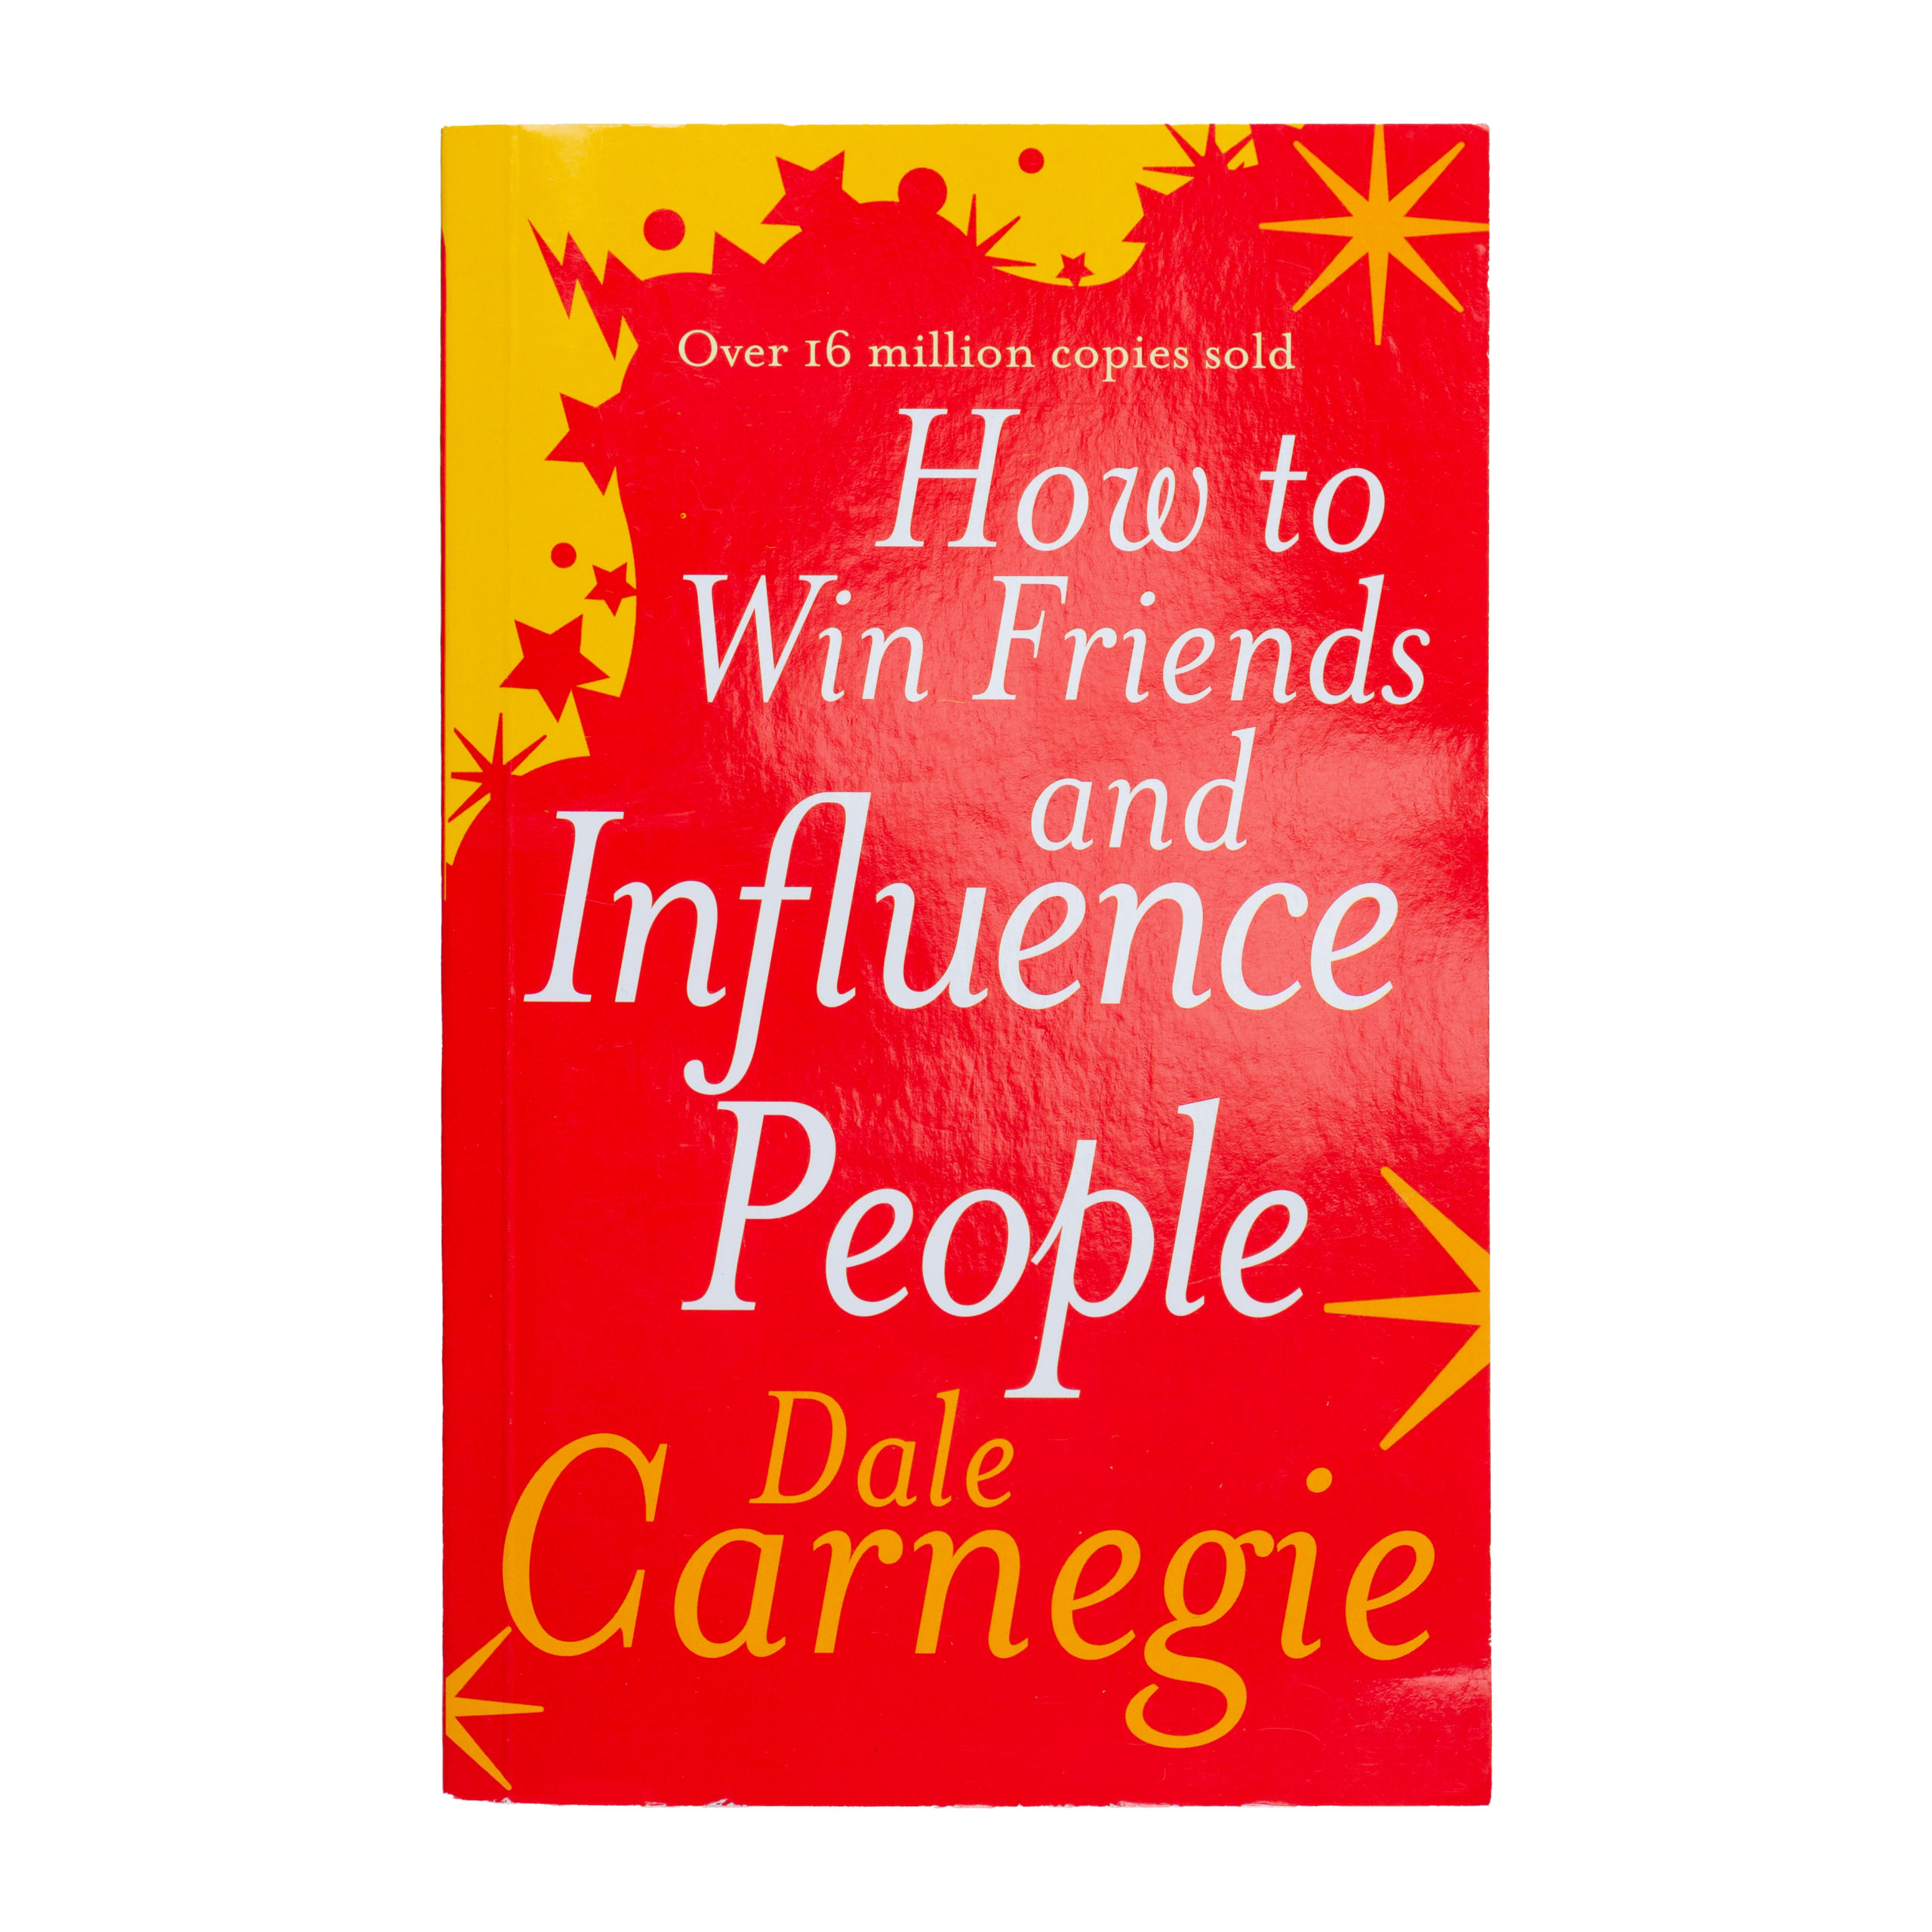 How to Win Friends and Influence People download the new for ios